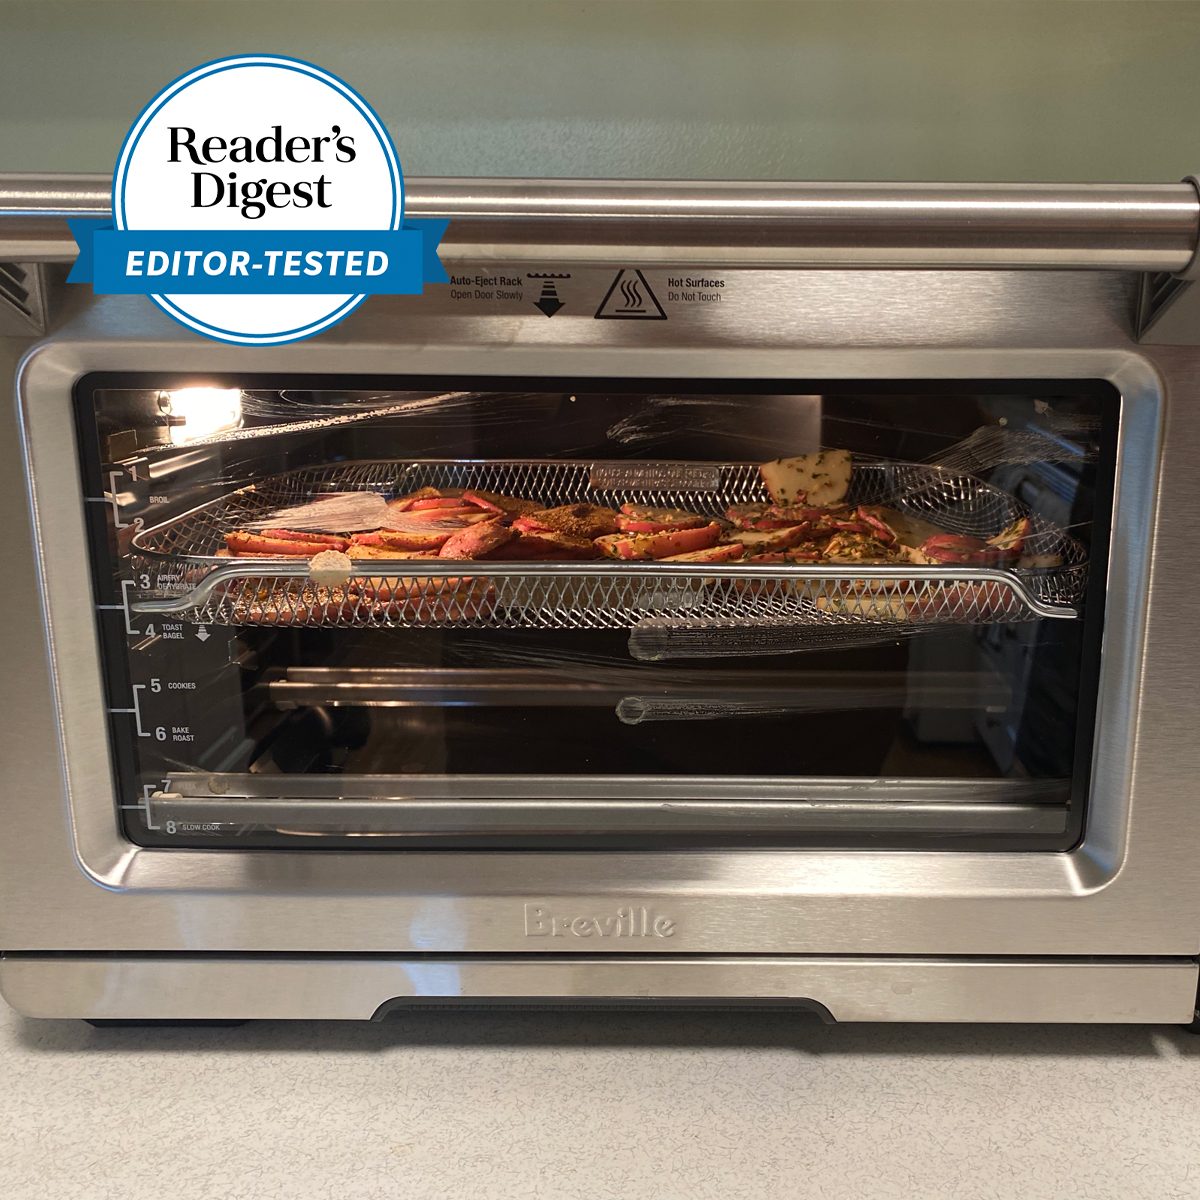 https://www.rd.com/wp-content/uploads/2022/06/RD-Editor-Tested-Square-breville-smart-oven-Courtesy-Nicole-Doster.jpg?fit=700%2C700